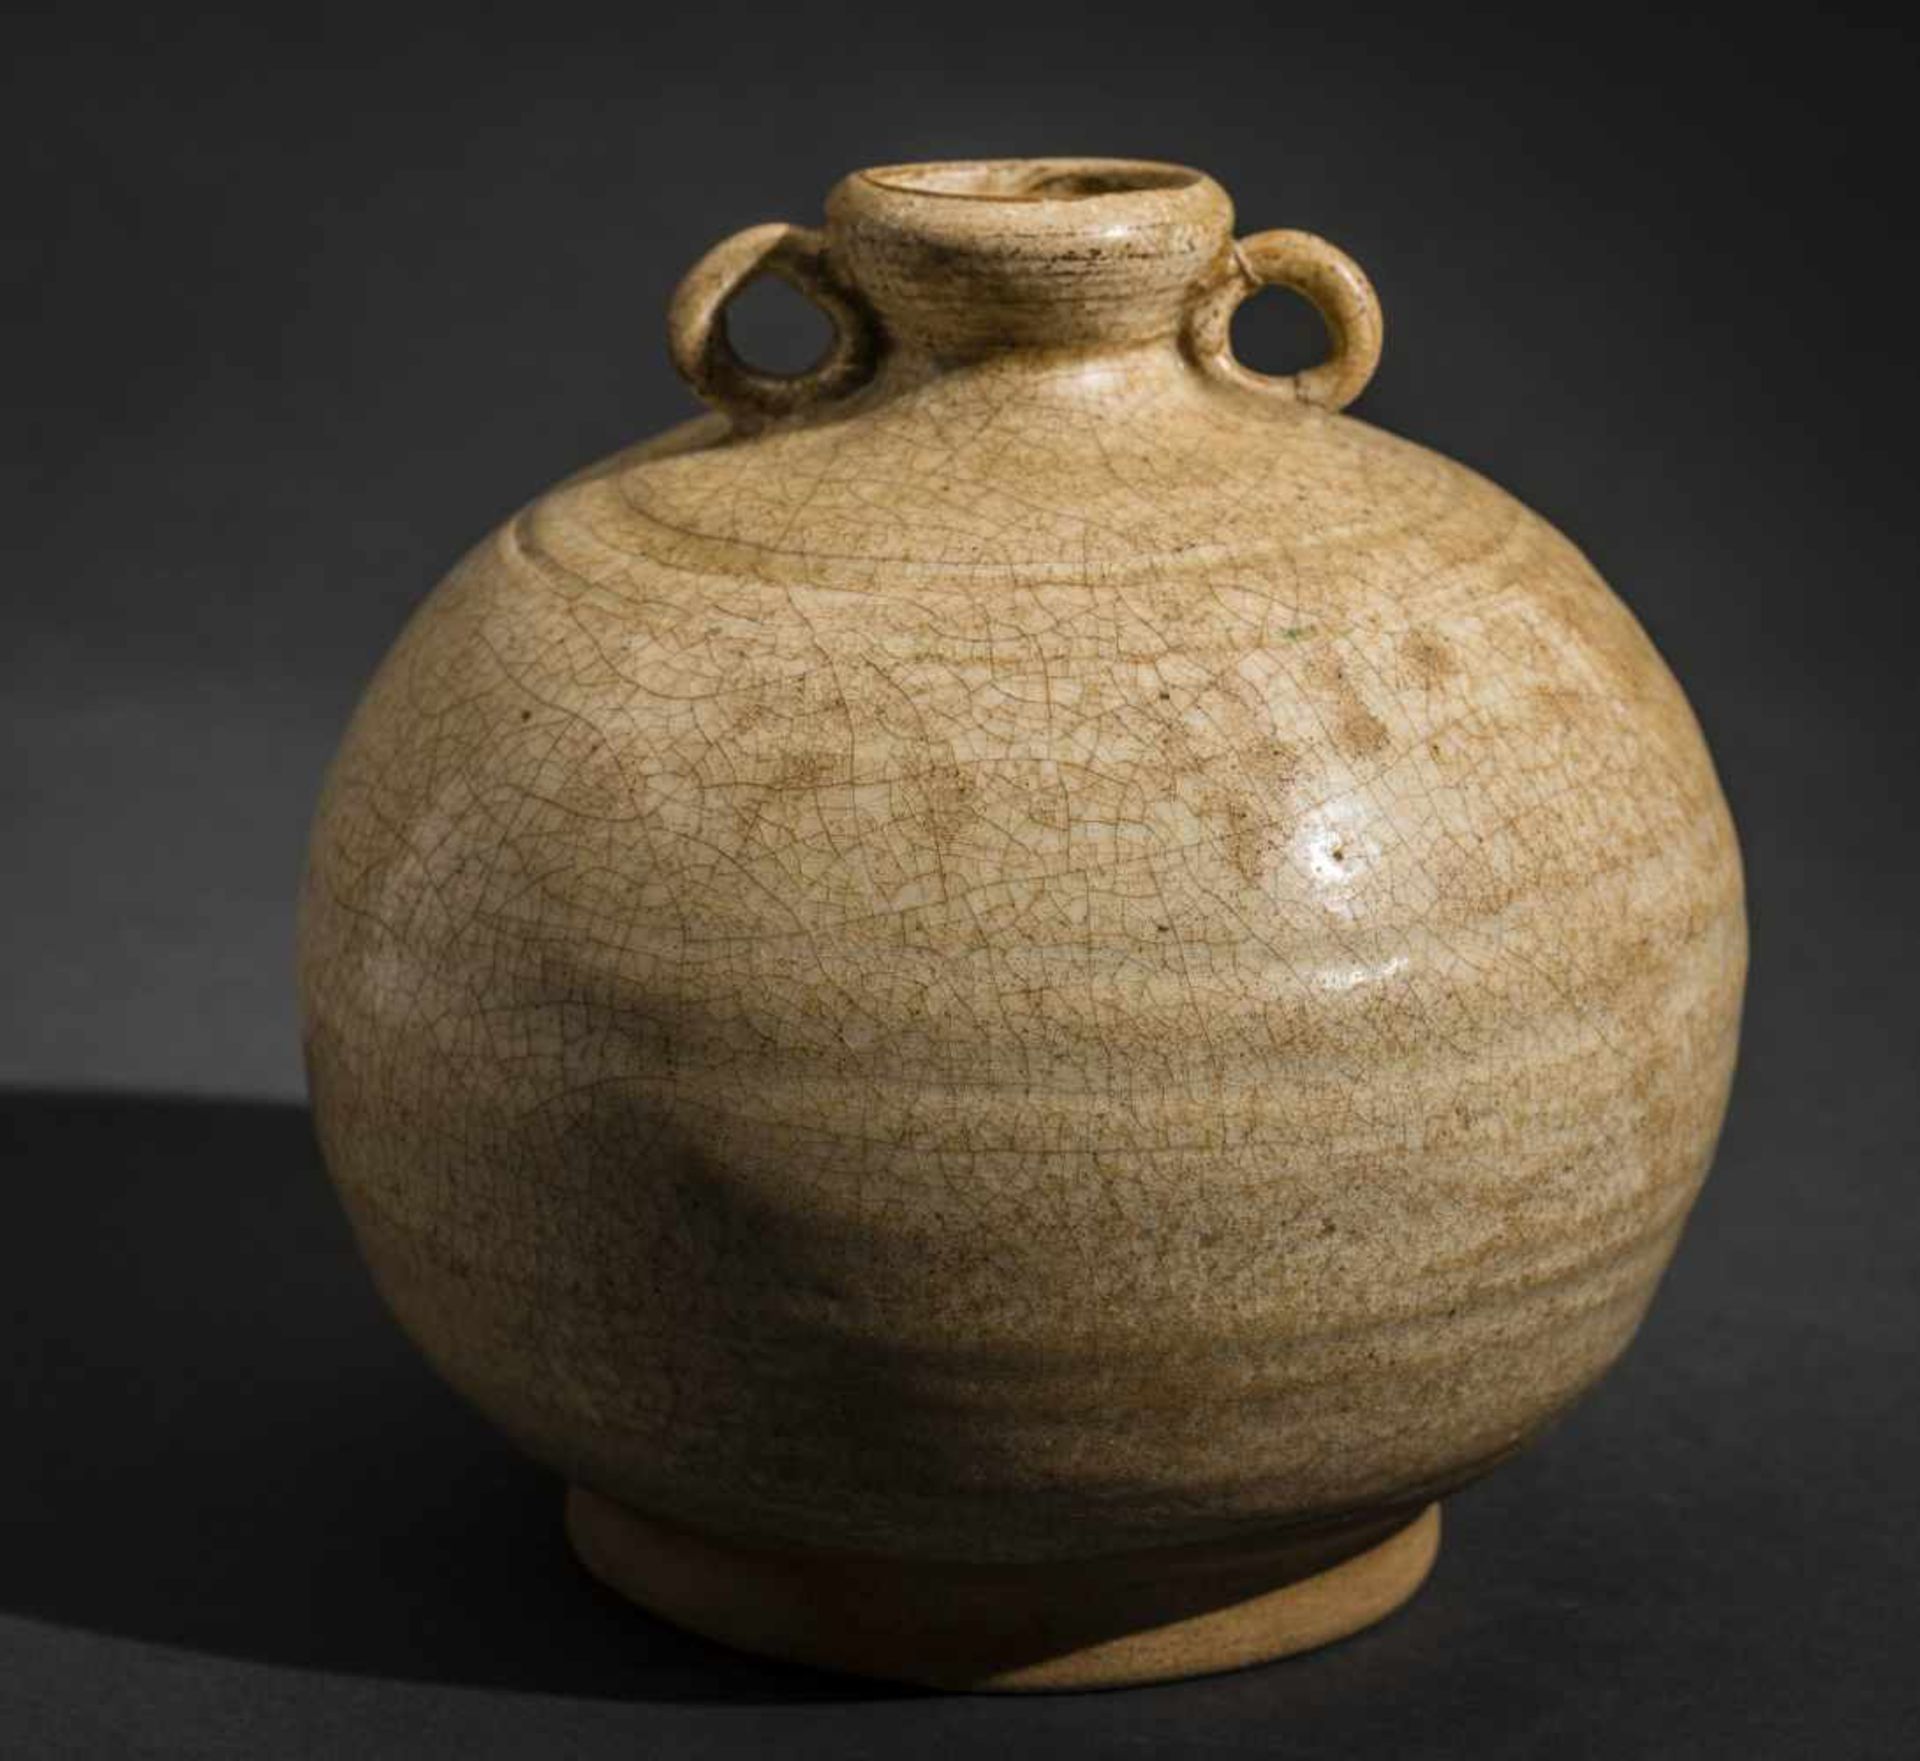 A SPHERICAL CONTAINER WITH LOOP HANDLESGlazed ceramicChina, Qing dynasty (1644-1911)Bright glaze